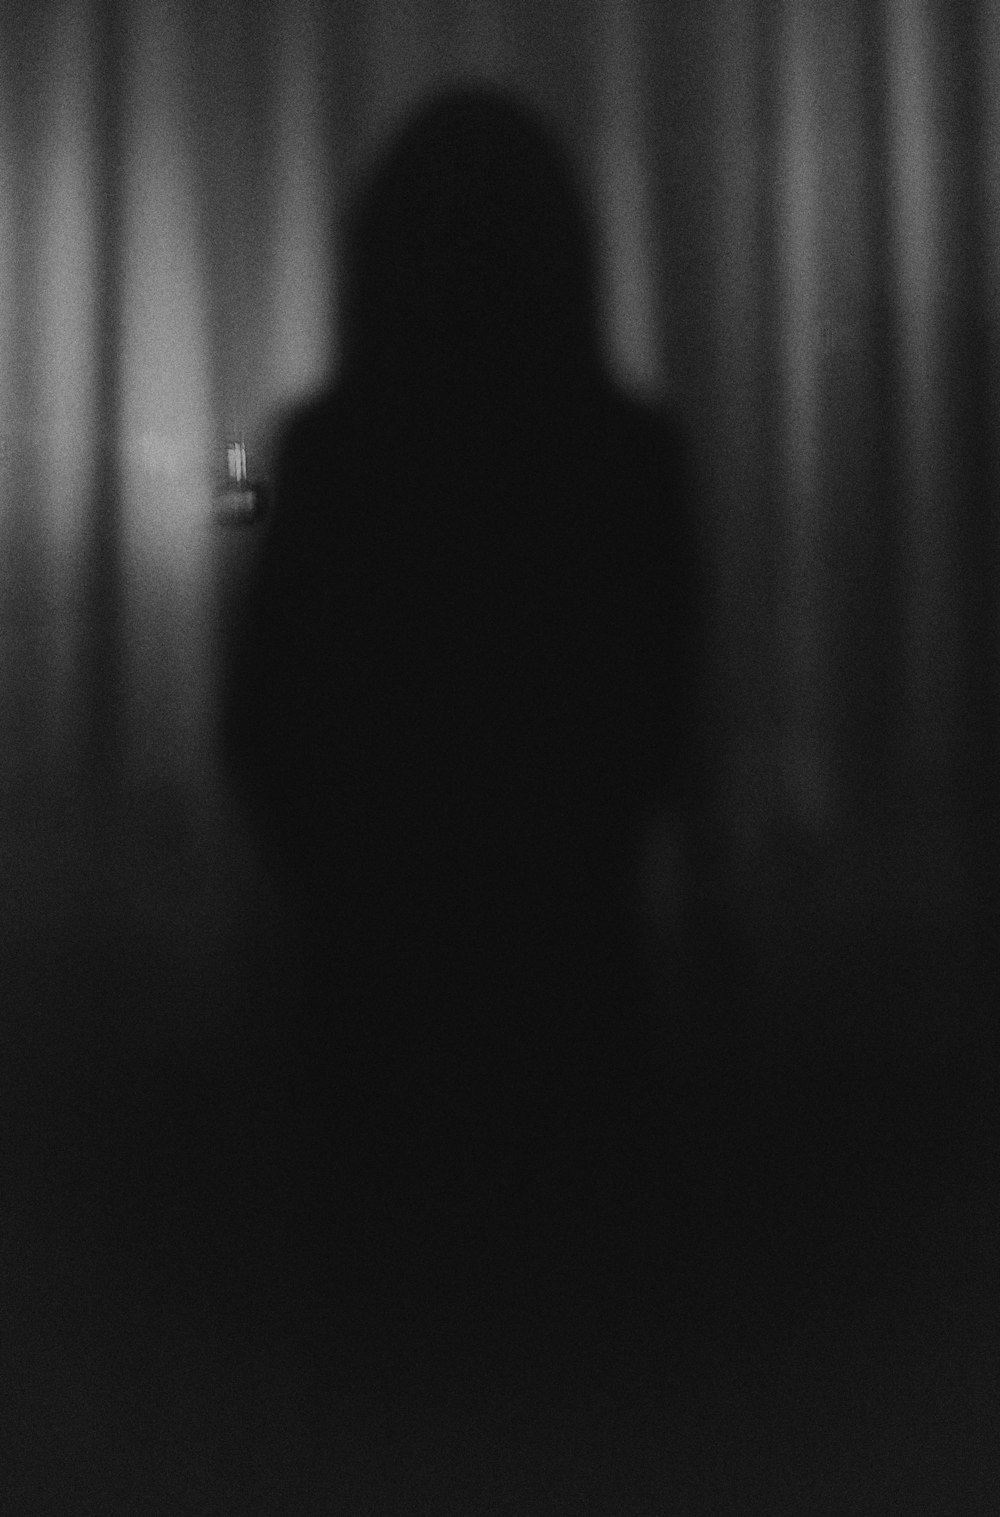 500+ [HQ] Black Shadow Pictures | Download Free Images & Stock Photos on  Unsplash